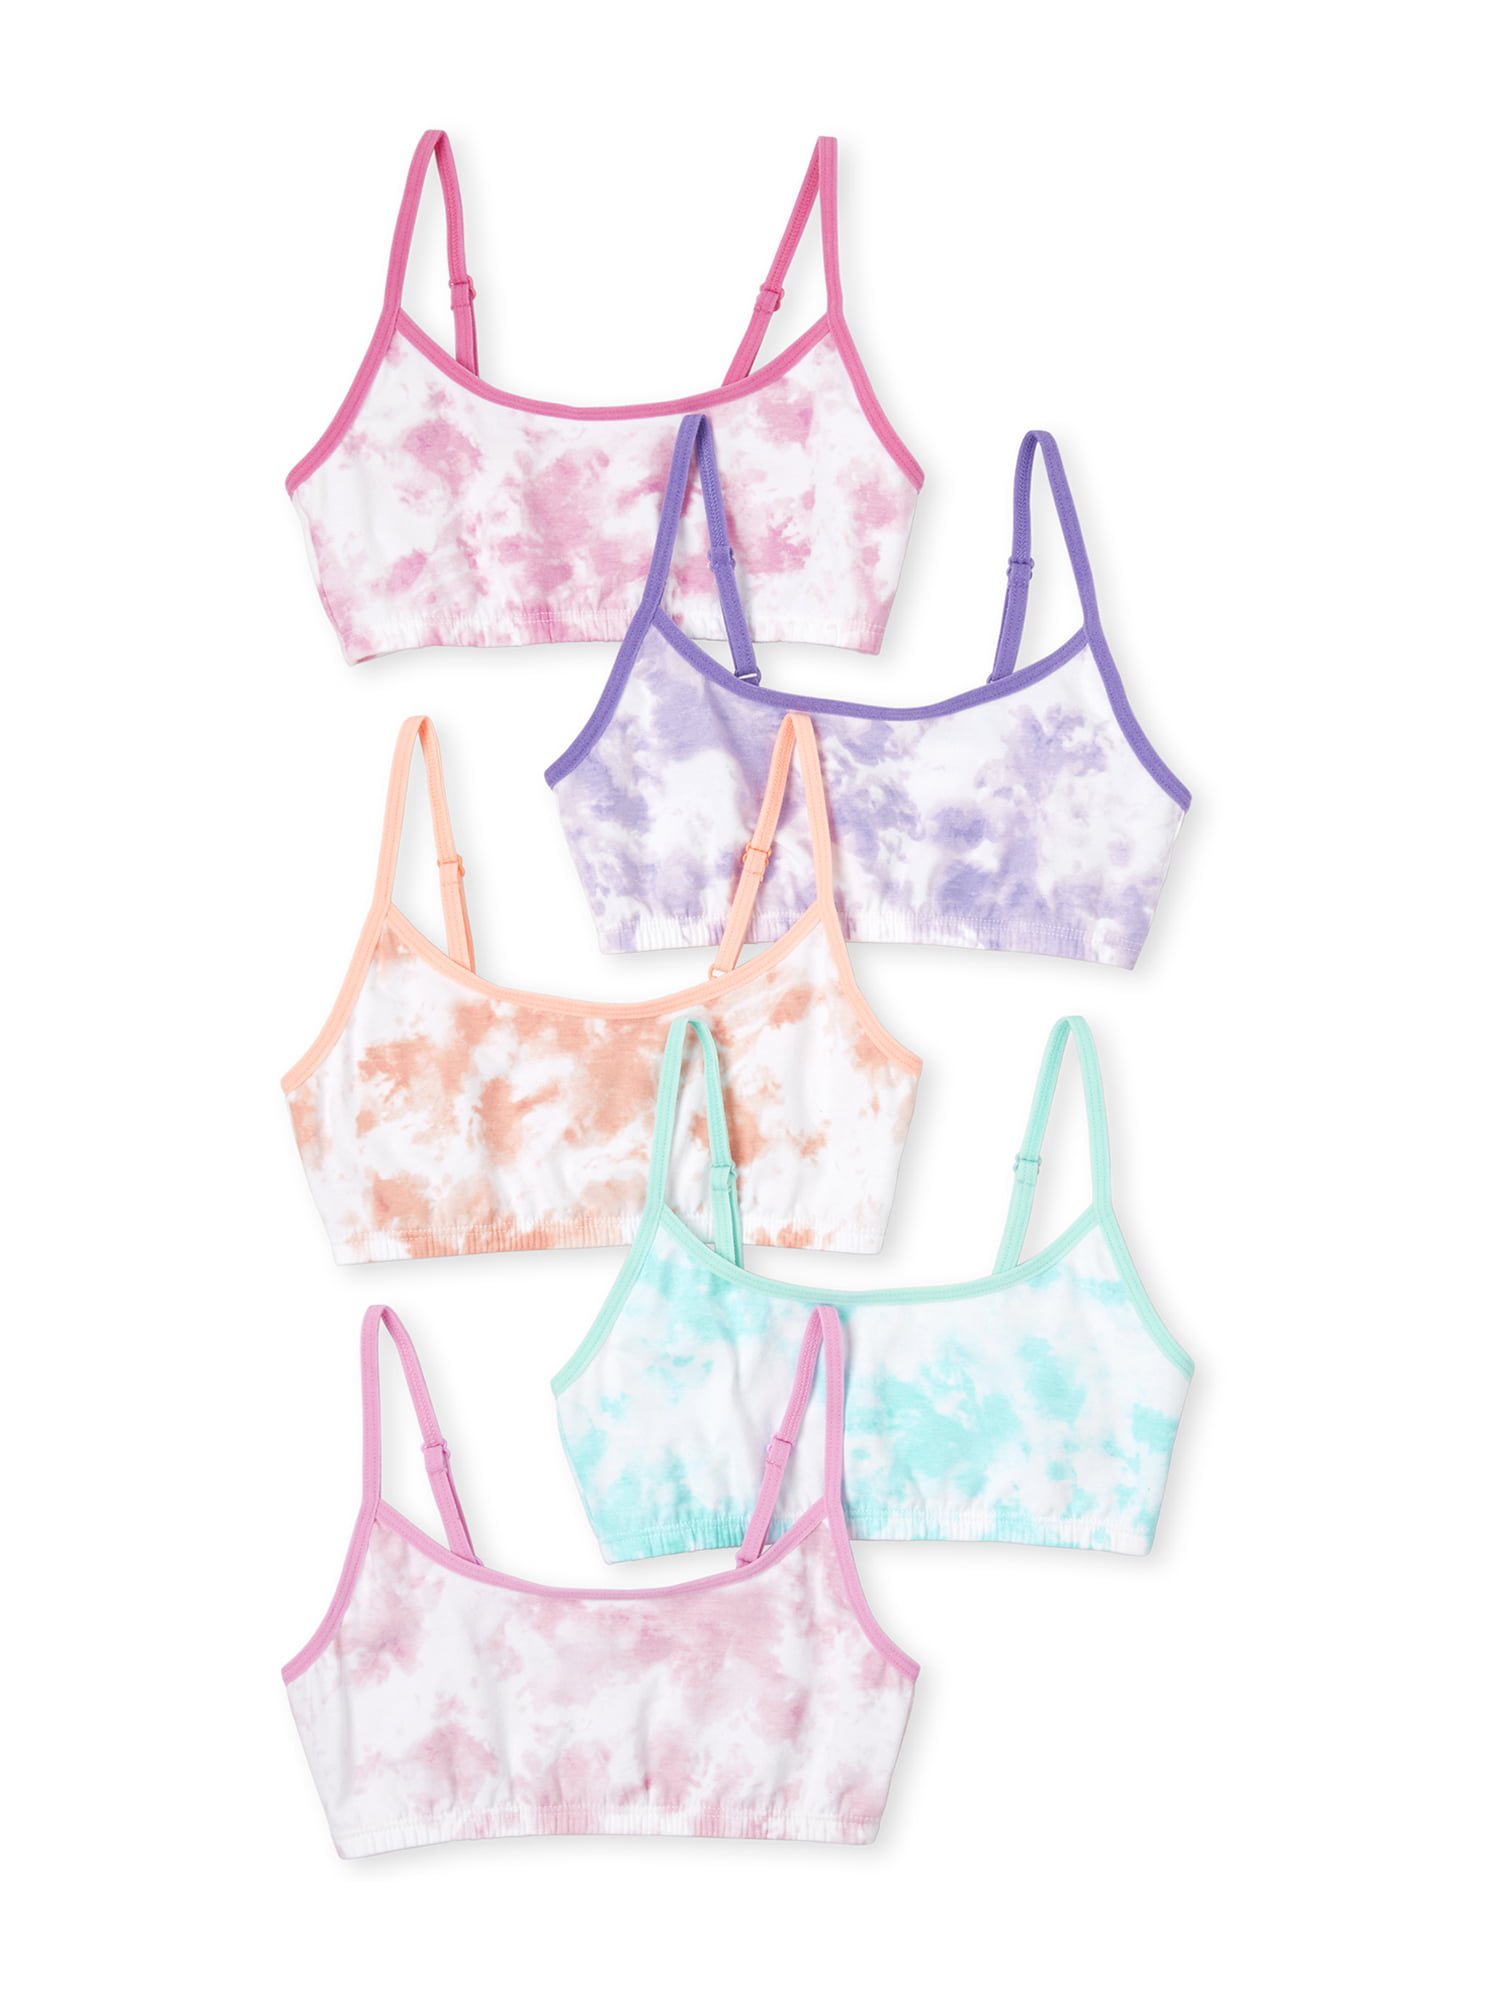 The Children's Place Girls Bras, 5-Pack, Sizes 4-16 